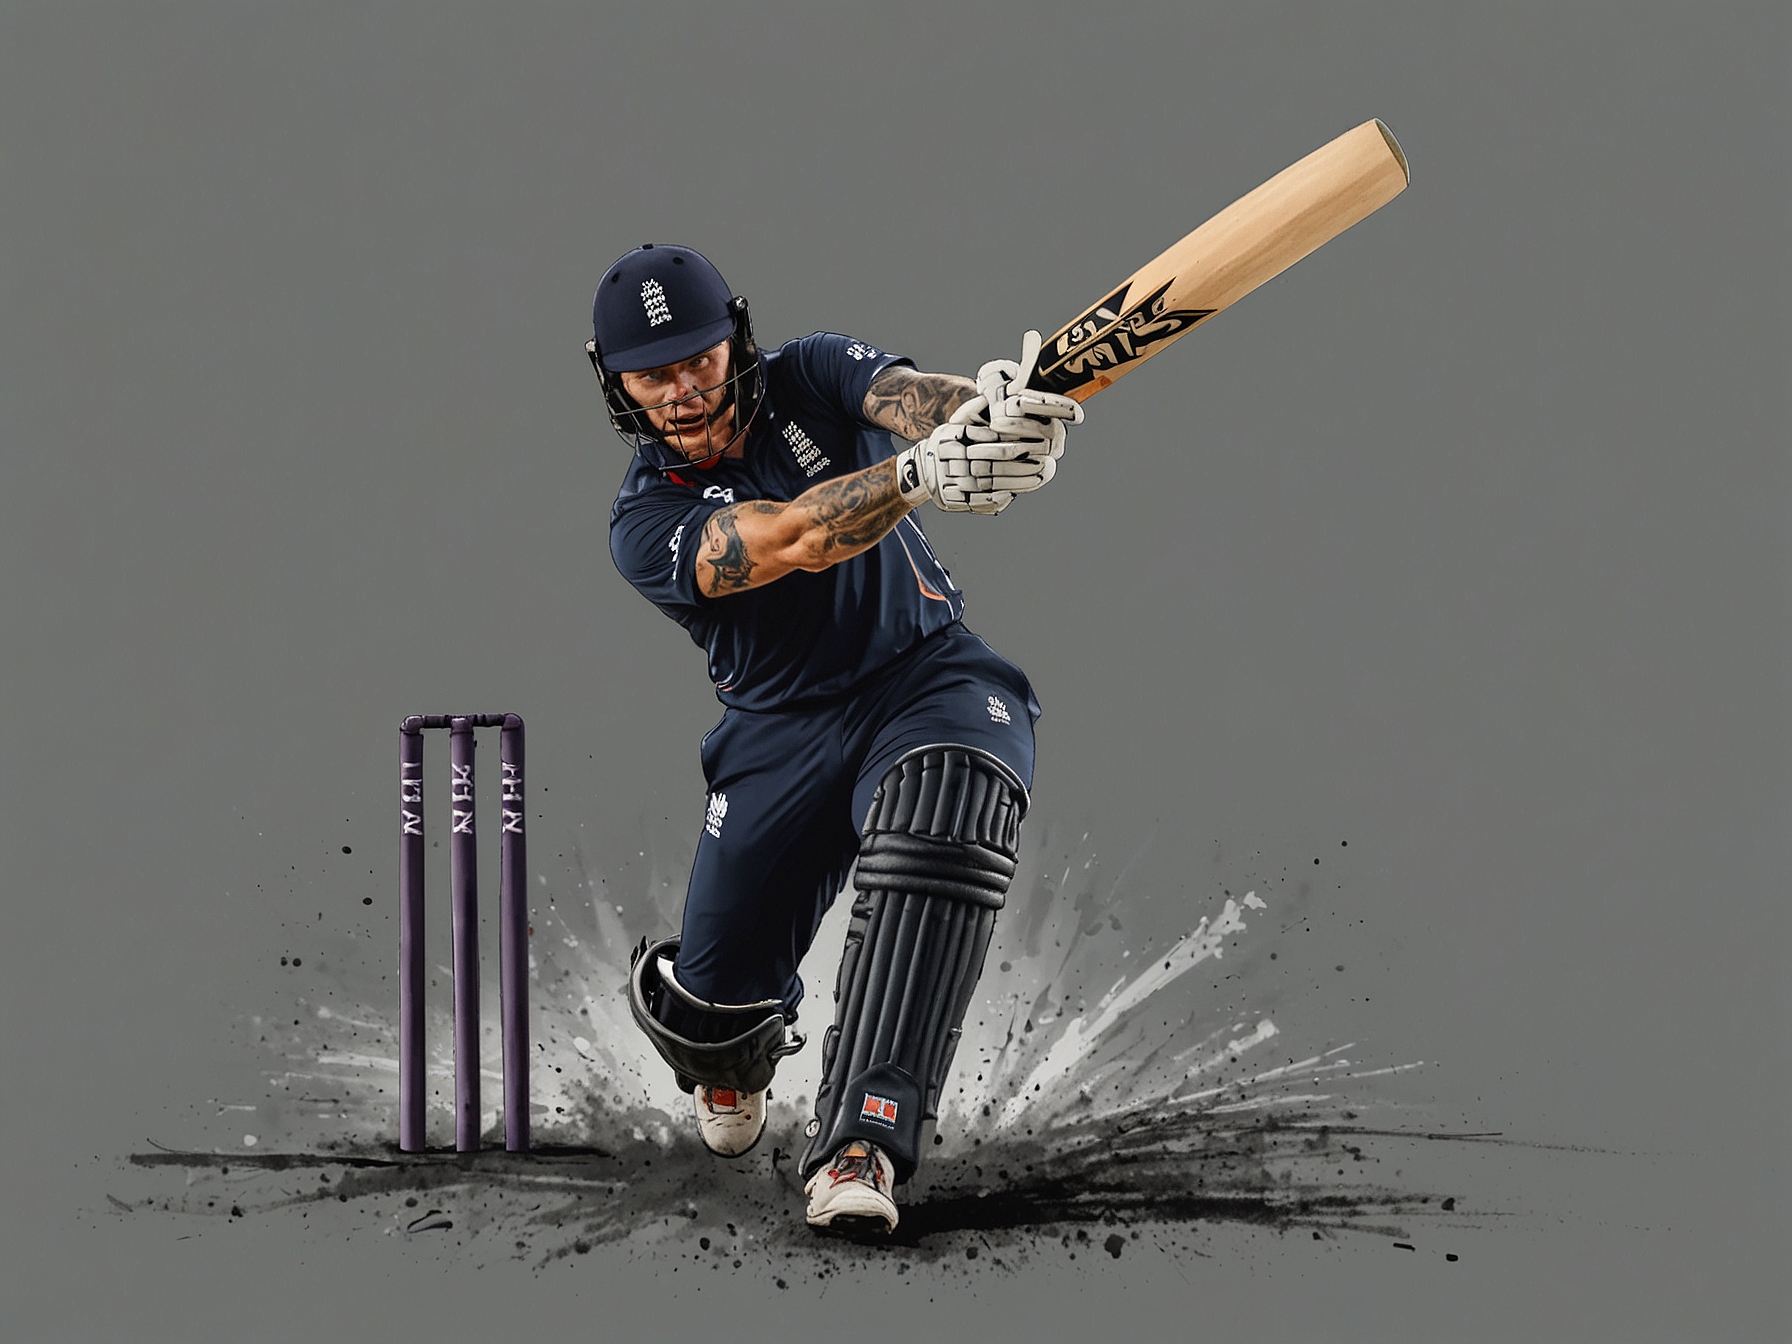 A dynamic moment as England's Ben Stokes hits a powerful shot, showcasing his aggressive batting skill in the crucial must-win T20 World Cup match against the USA.